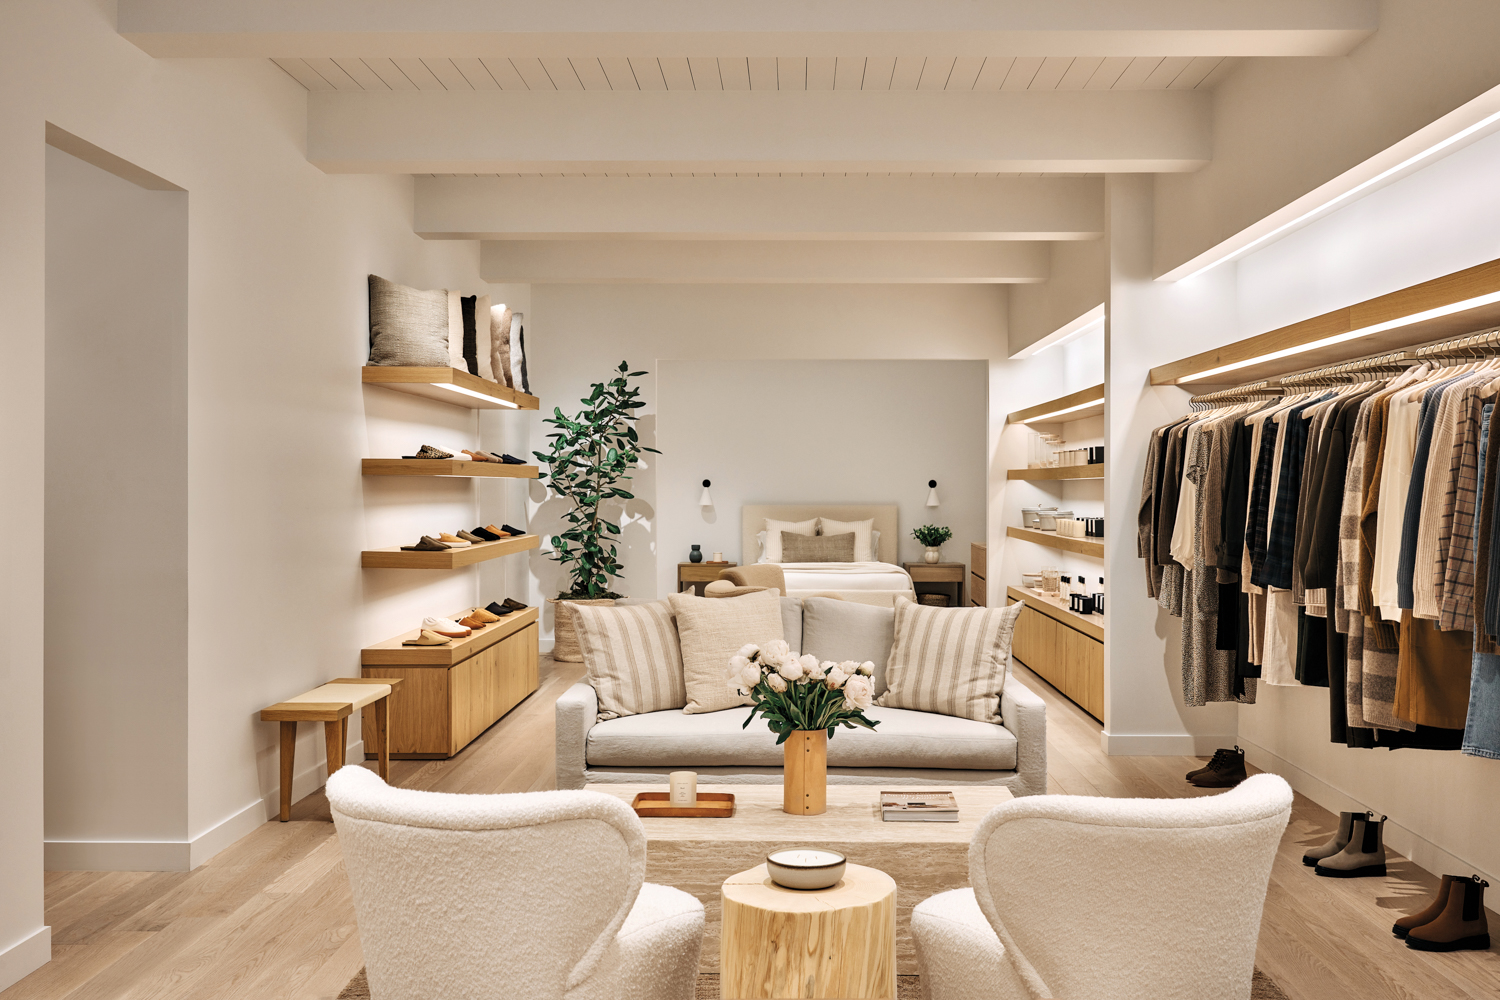 Jenni Kayne showroom with cream-colored sofa, armchairs, rack of clothes and wood display shelves